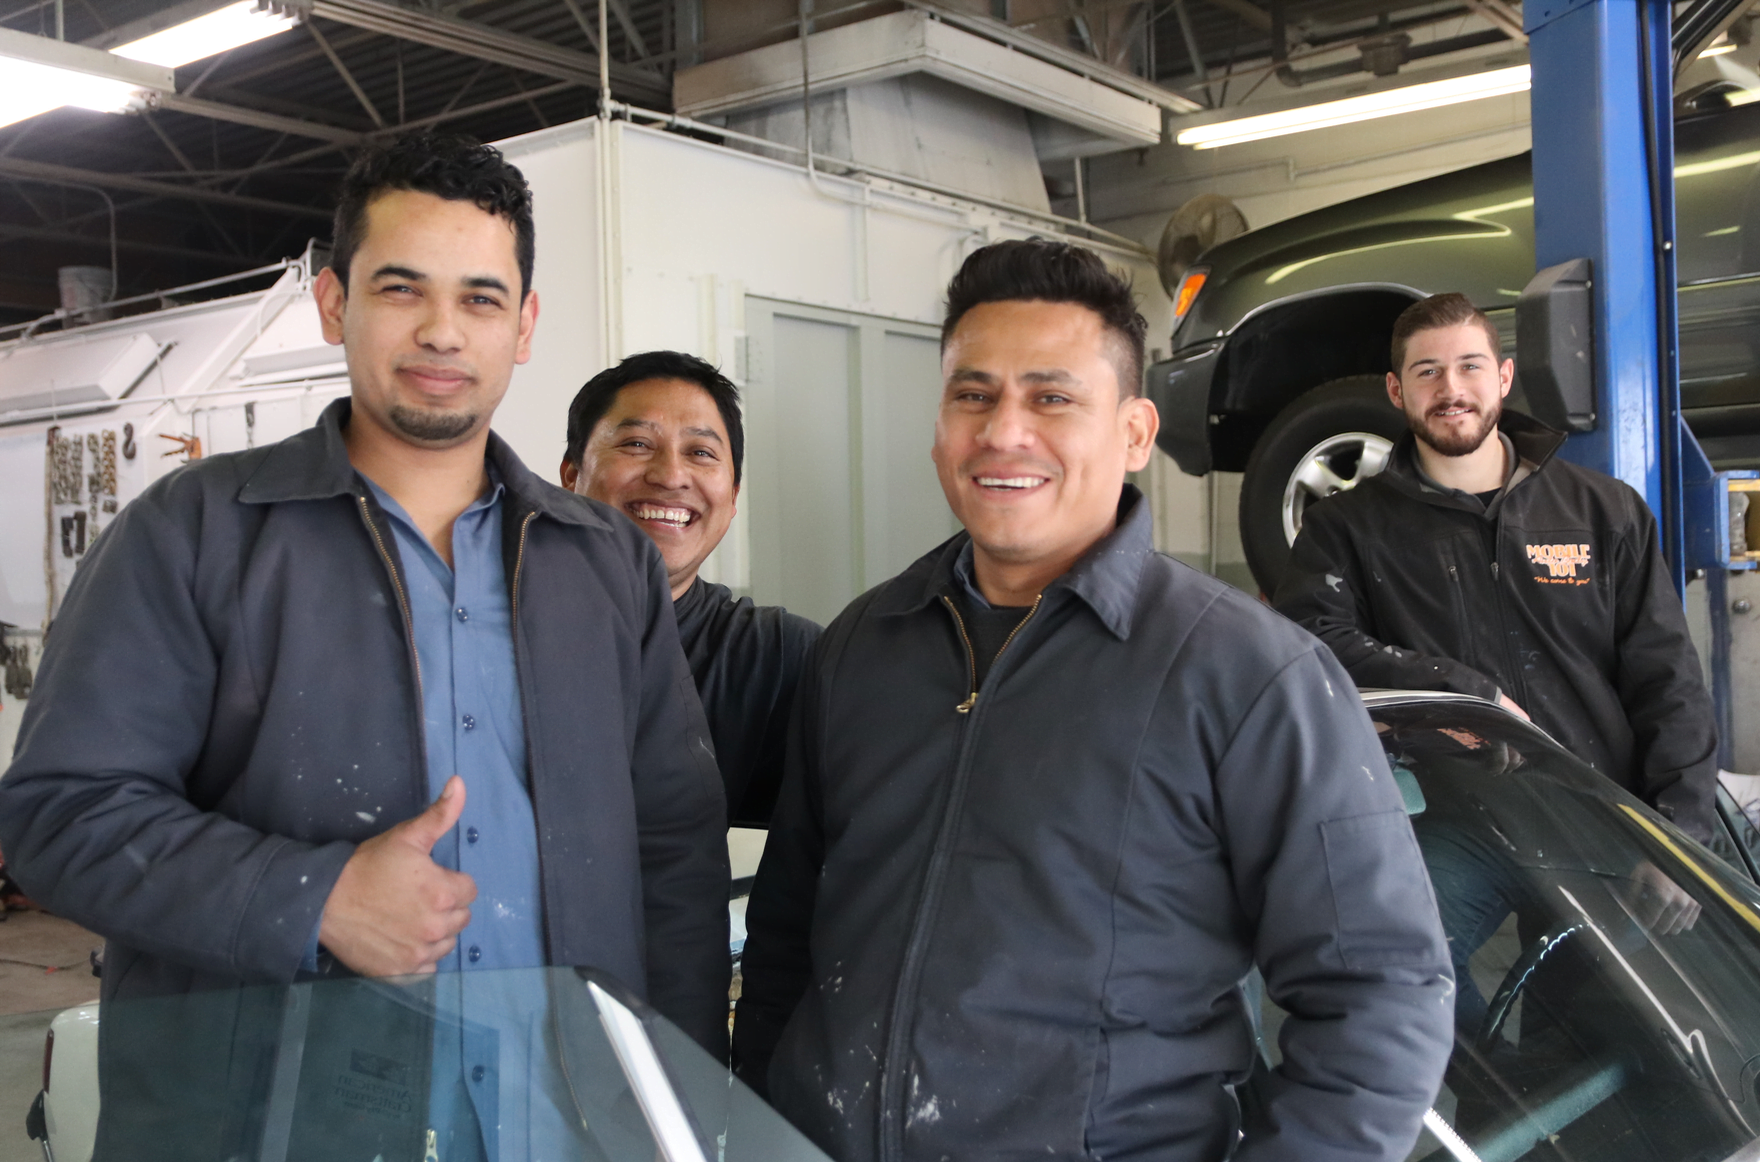 John Castellana Jr and some of his auto technicians at 368 West Ave in Stamford. Jan 21, 2020. Photo: Leslie Yager